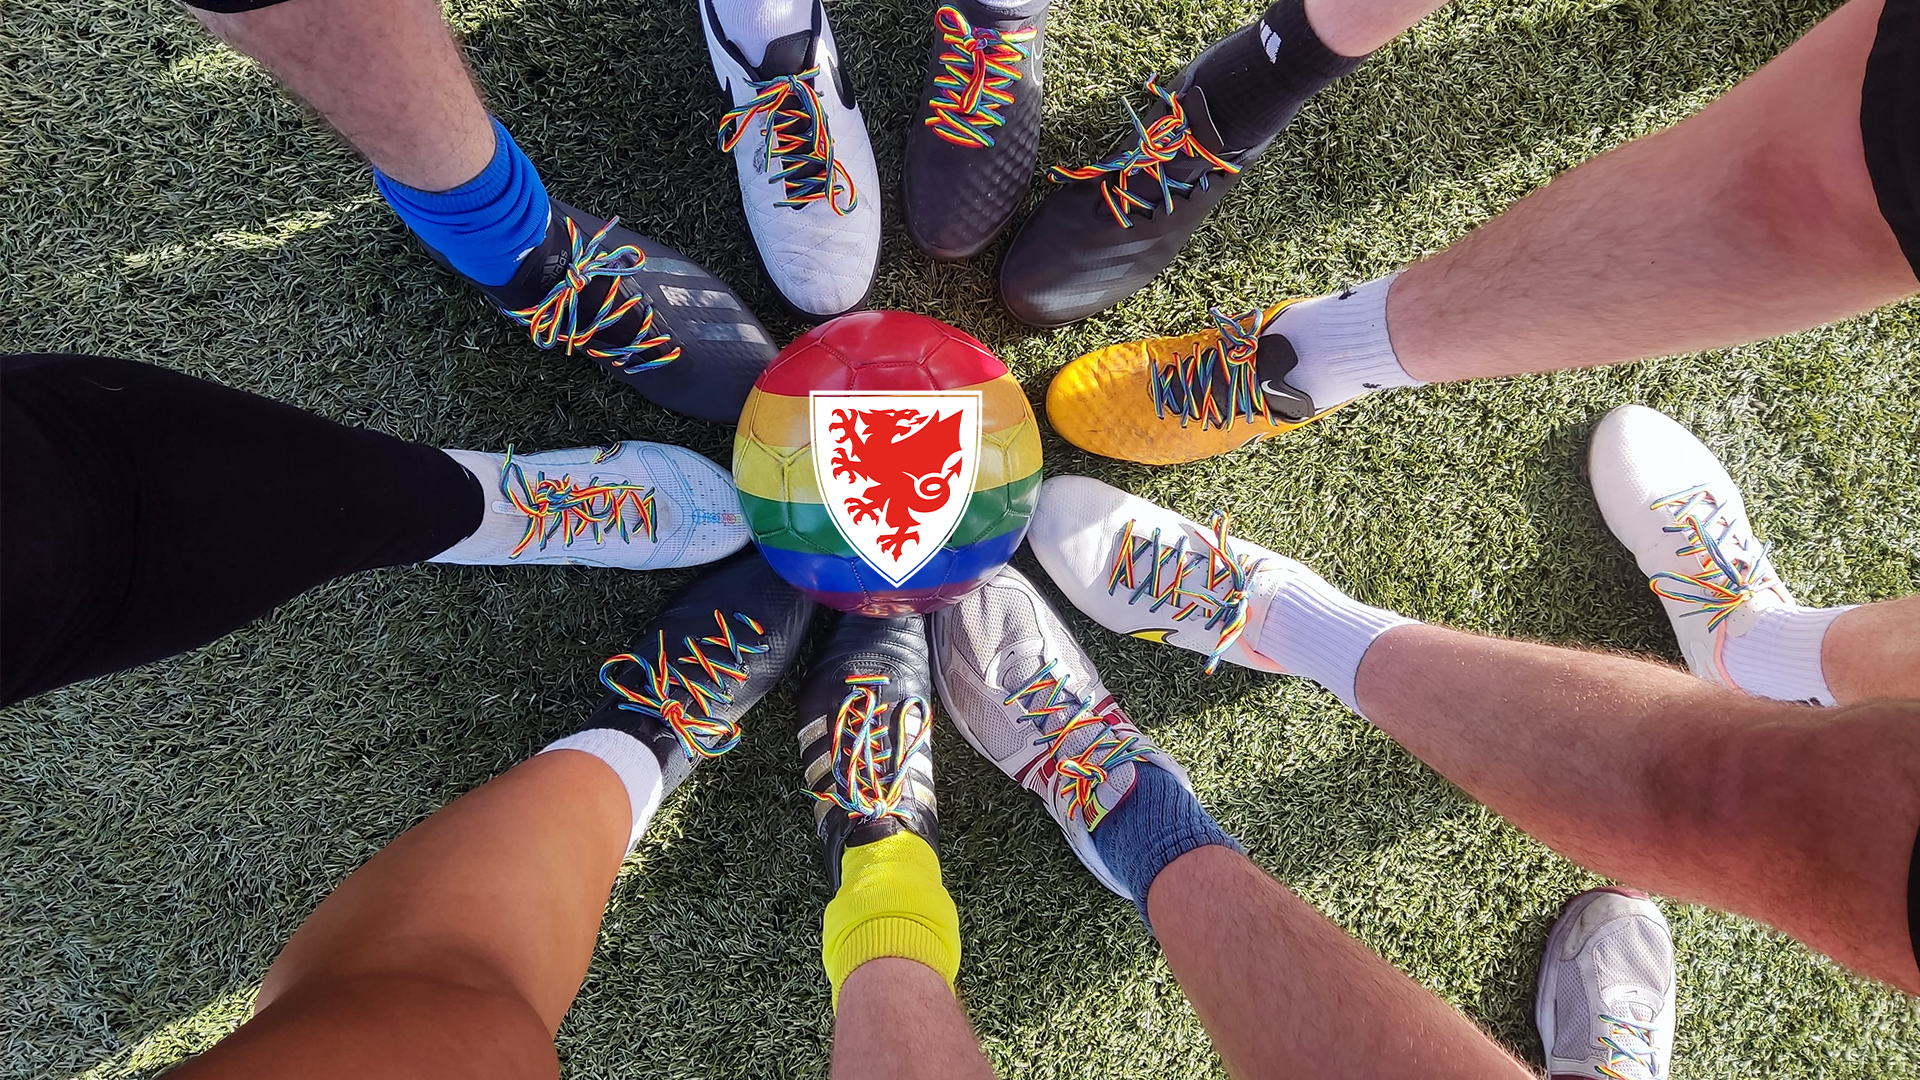 Stonewall Rainbow Laces Campaign 2022.